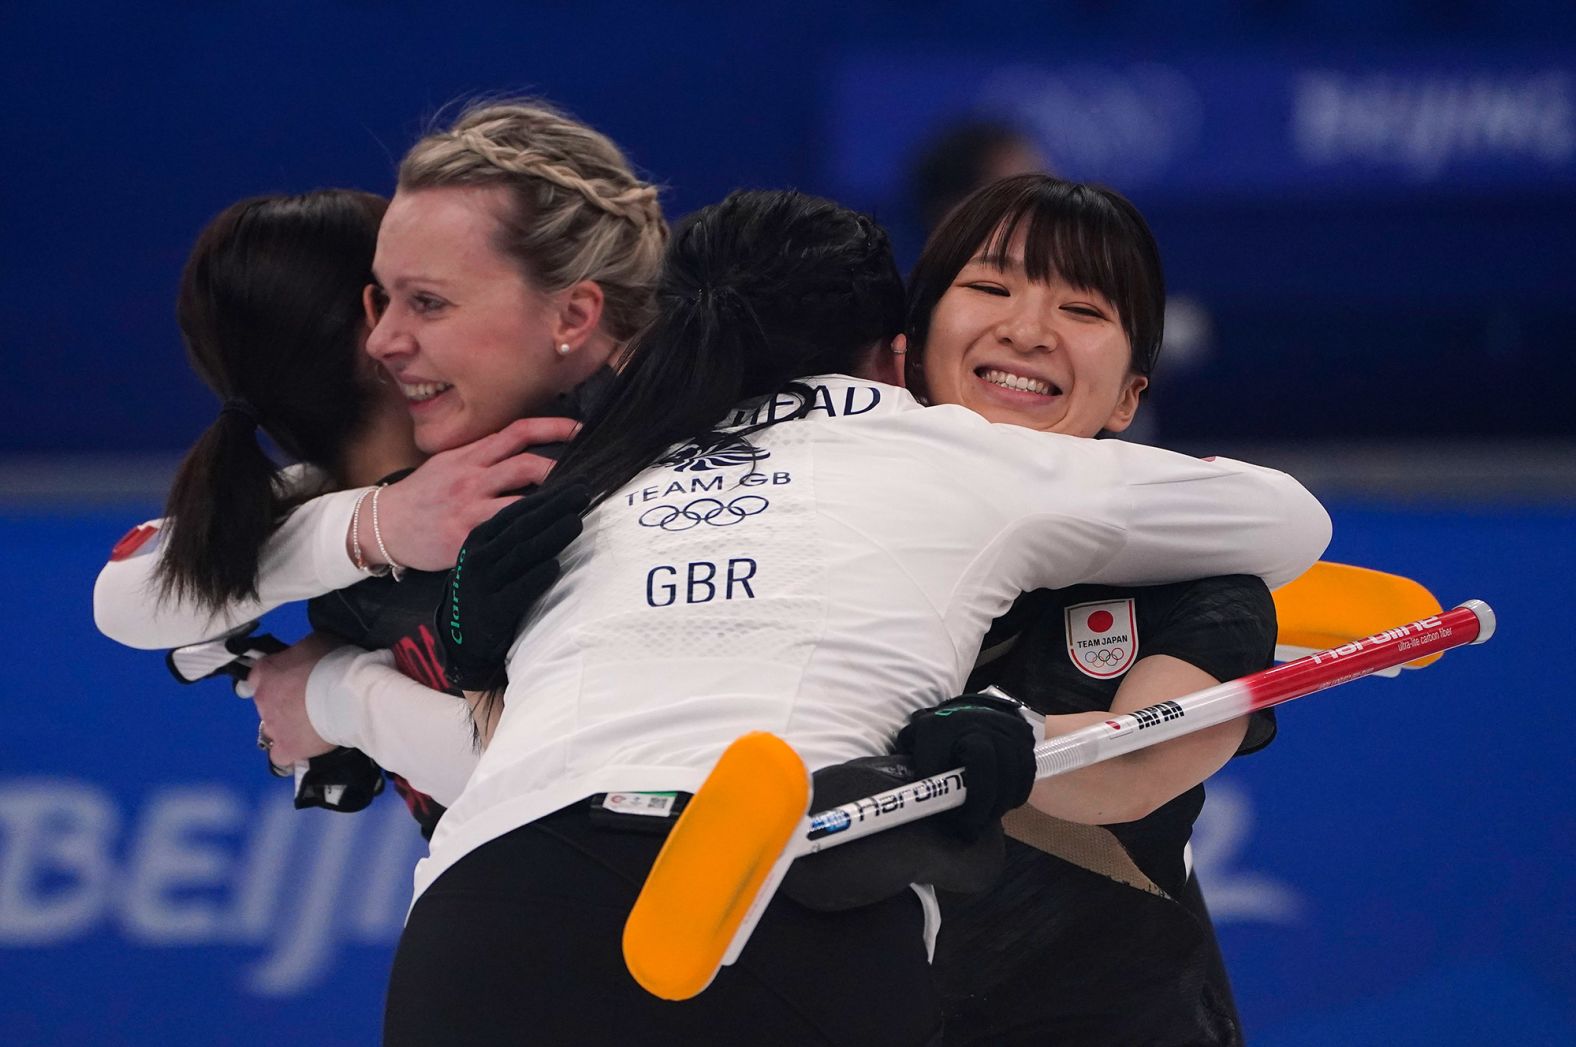 Athletes from both teams hug after the curling final between Japan and Great Britain on February 20. It was Great Britain's <a href="index.php?page=&url=https%3A%2F%2Fwww.cnn.com%2Fworld%2Flive-news%2Fbeijing-winter-olympics-02-20-22-spt%2Fh_1e0312d42a548ef11313678be9a87b61" target="_blank">only gold medal</a> of these Olympics.